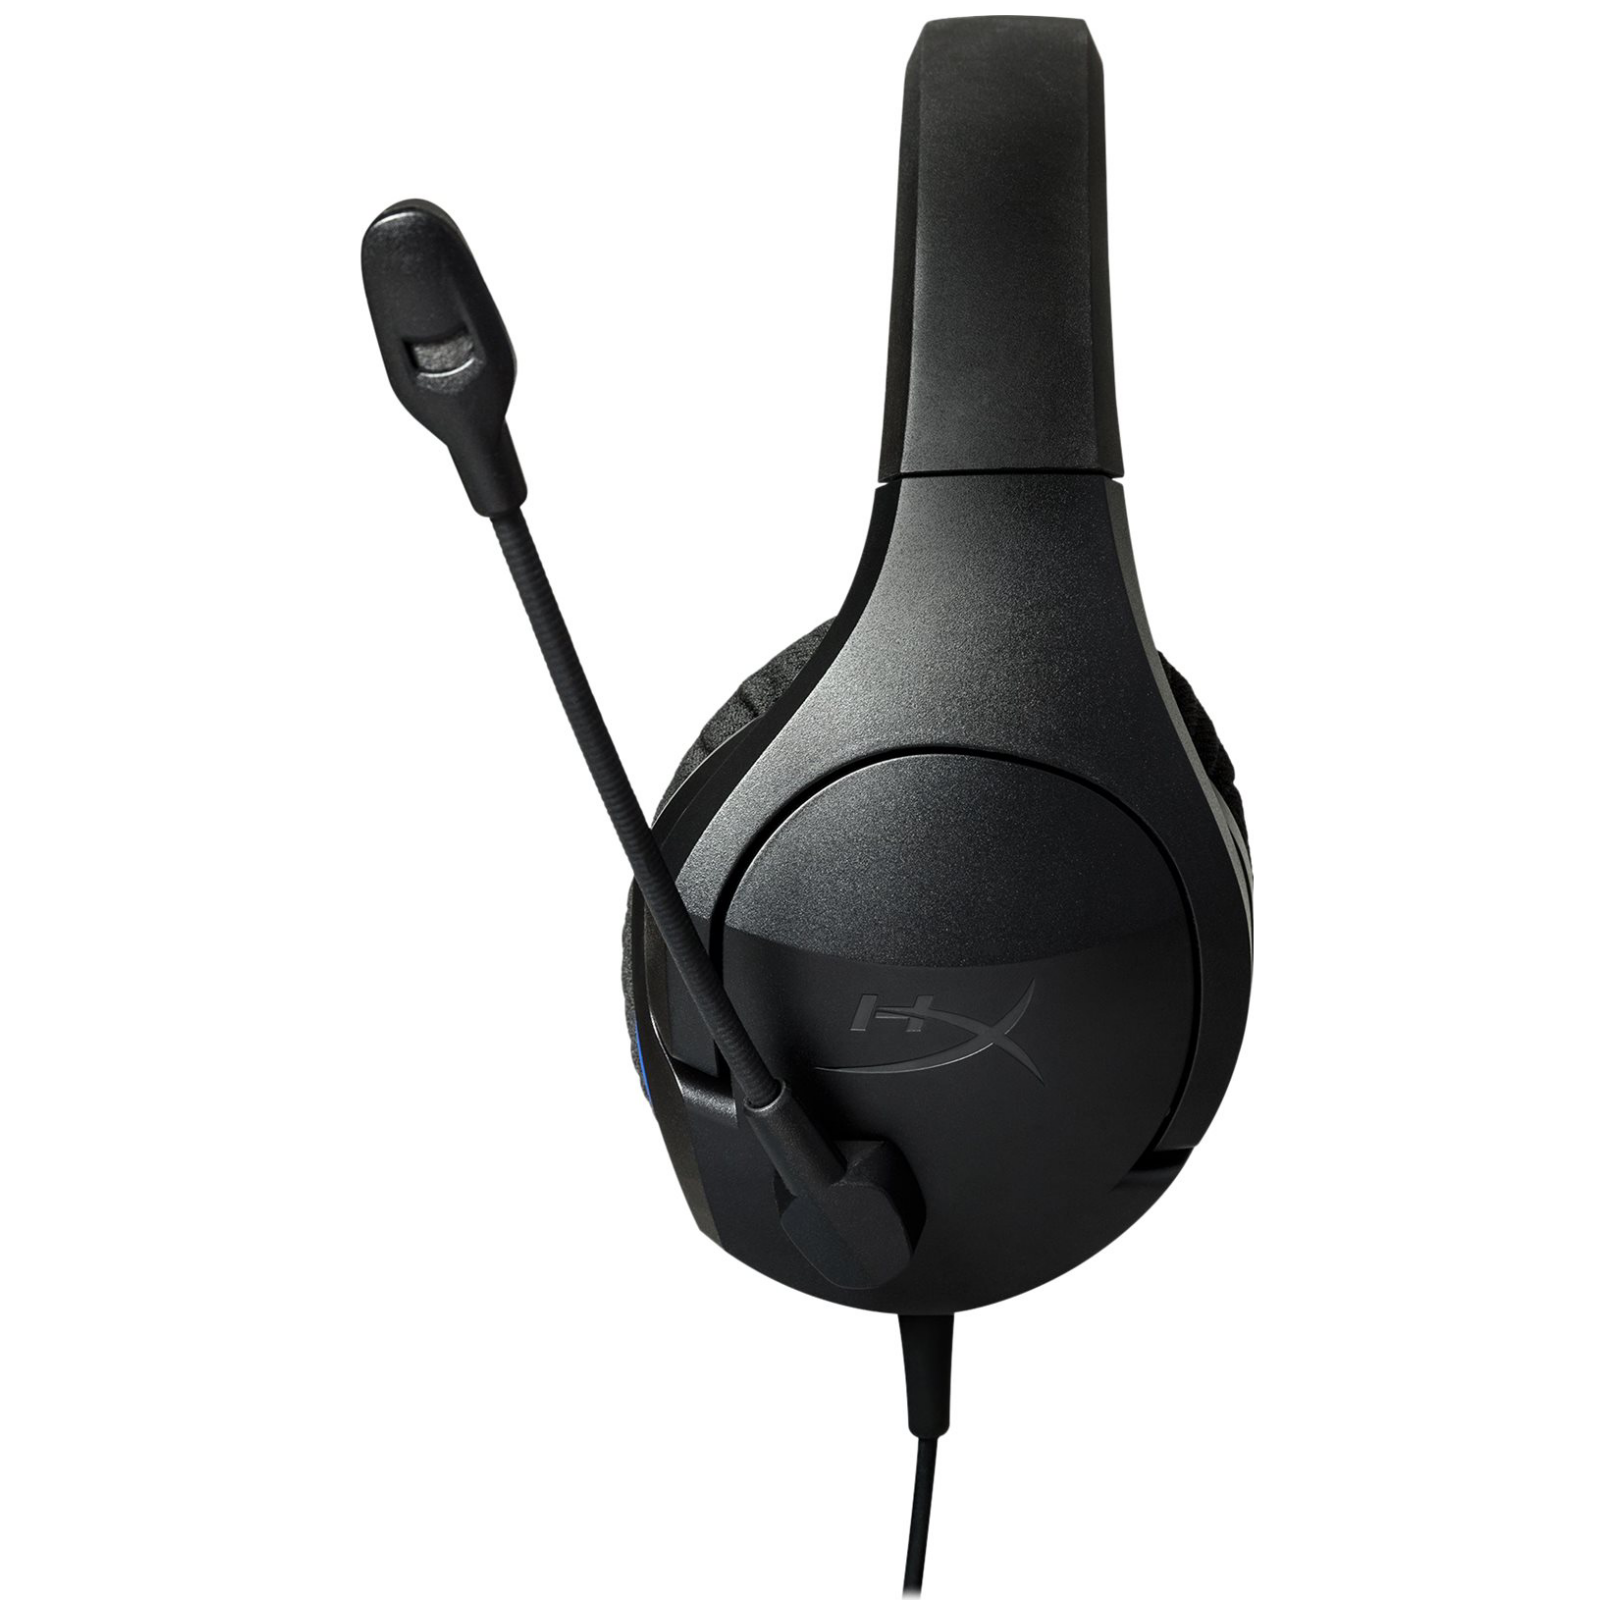 hyperx cloud stinger core 7.1 gaming headset for pc